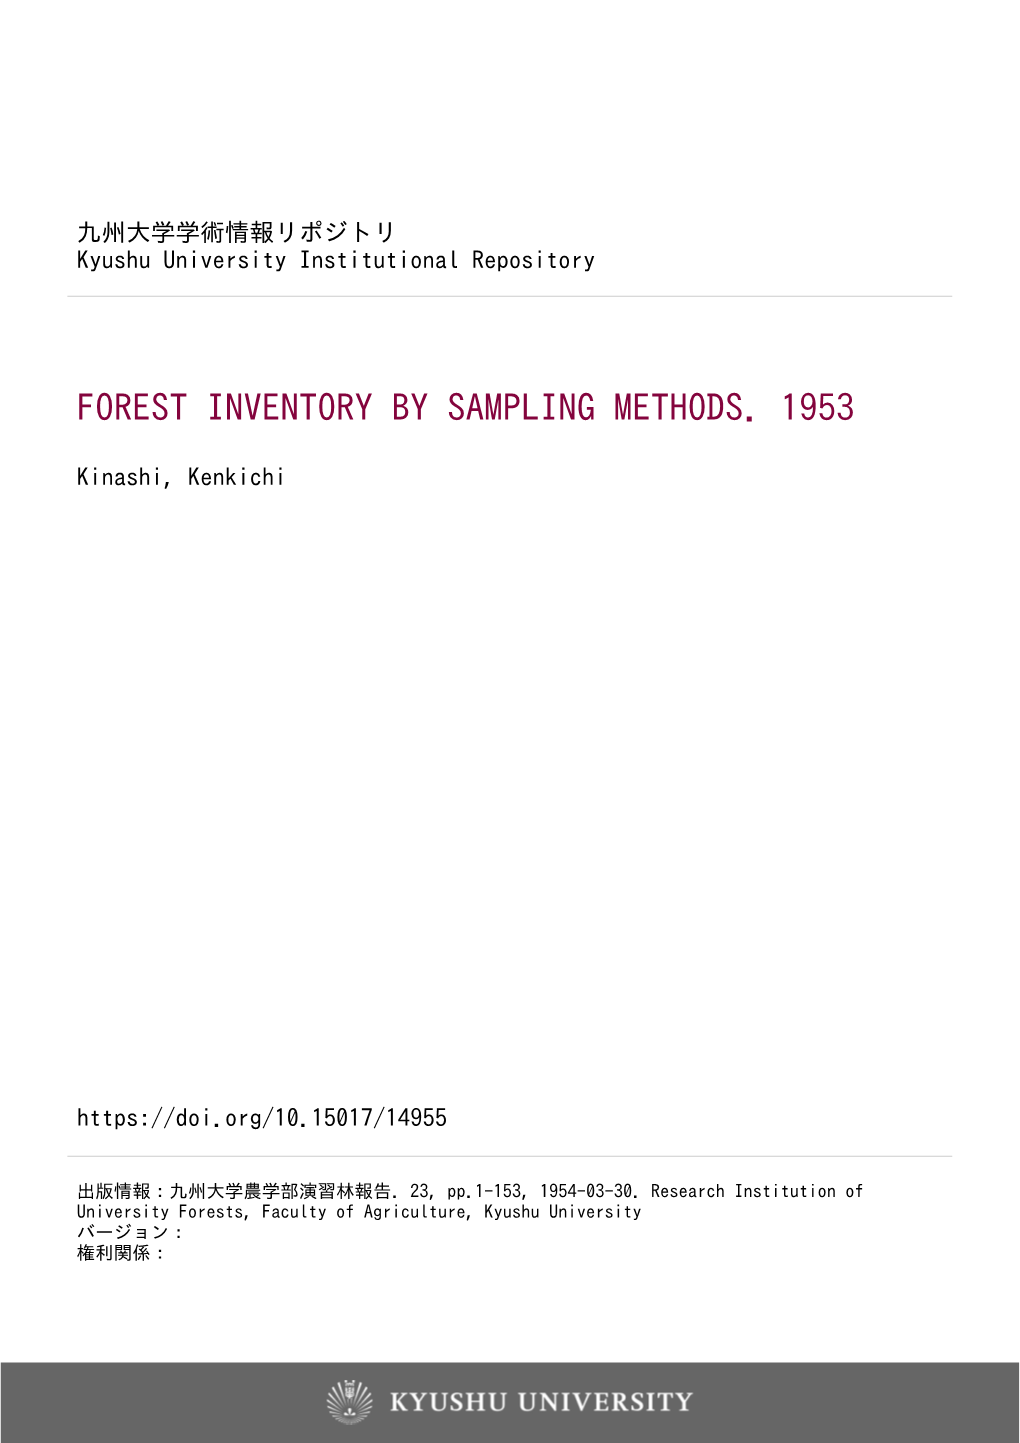 Forest Inventory by Sampling Methods. 1953